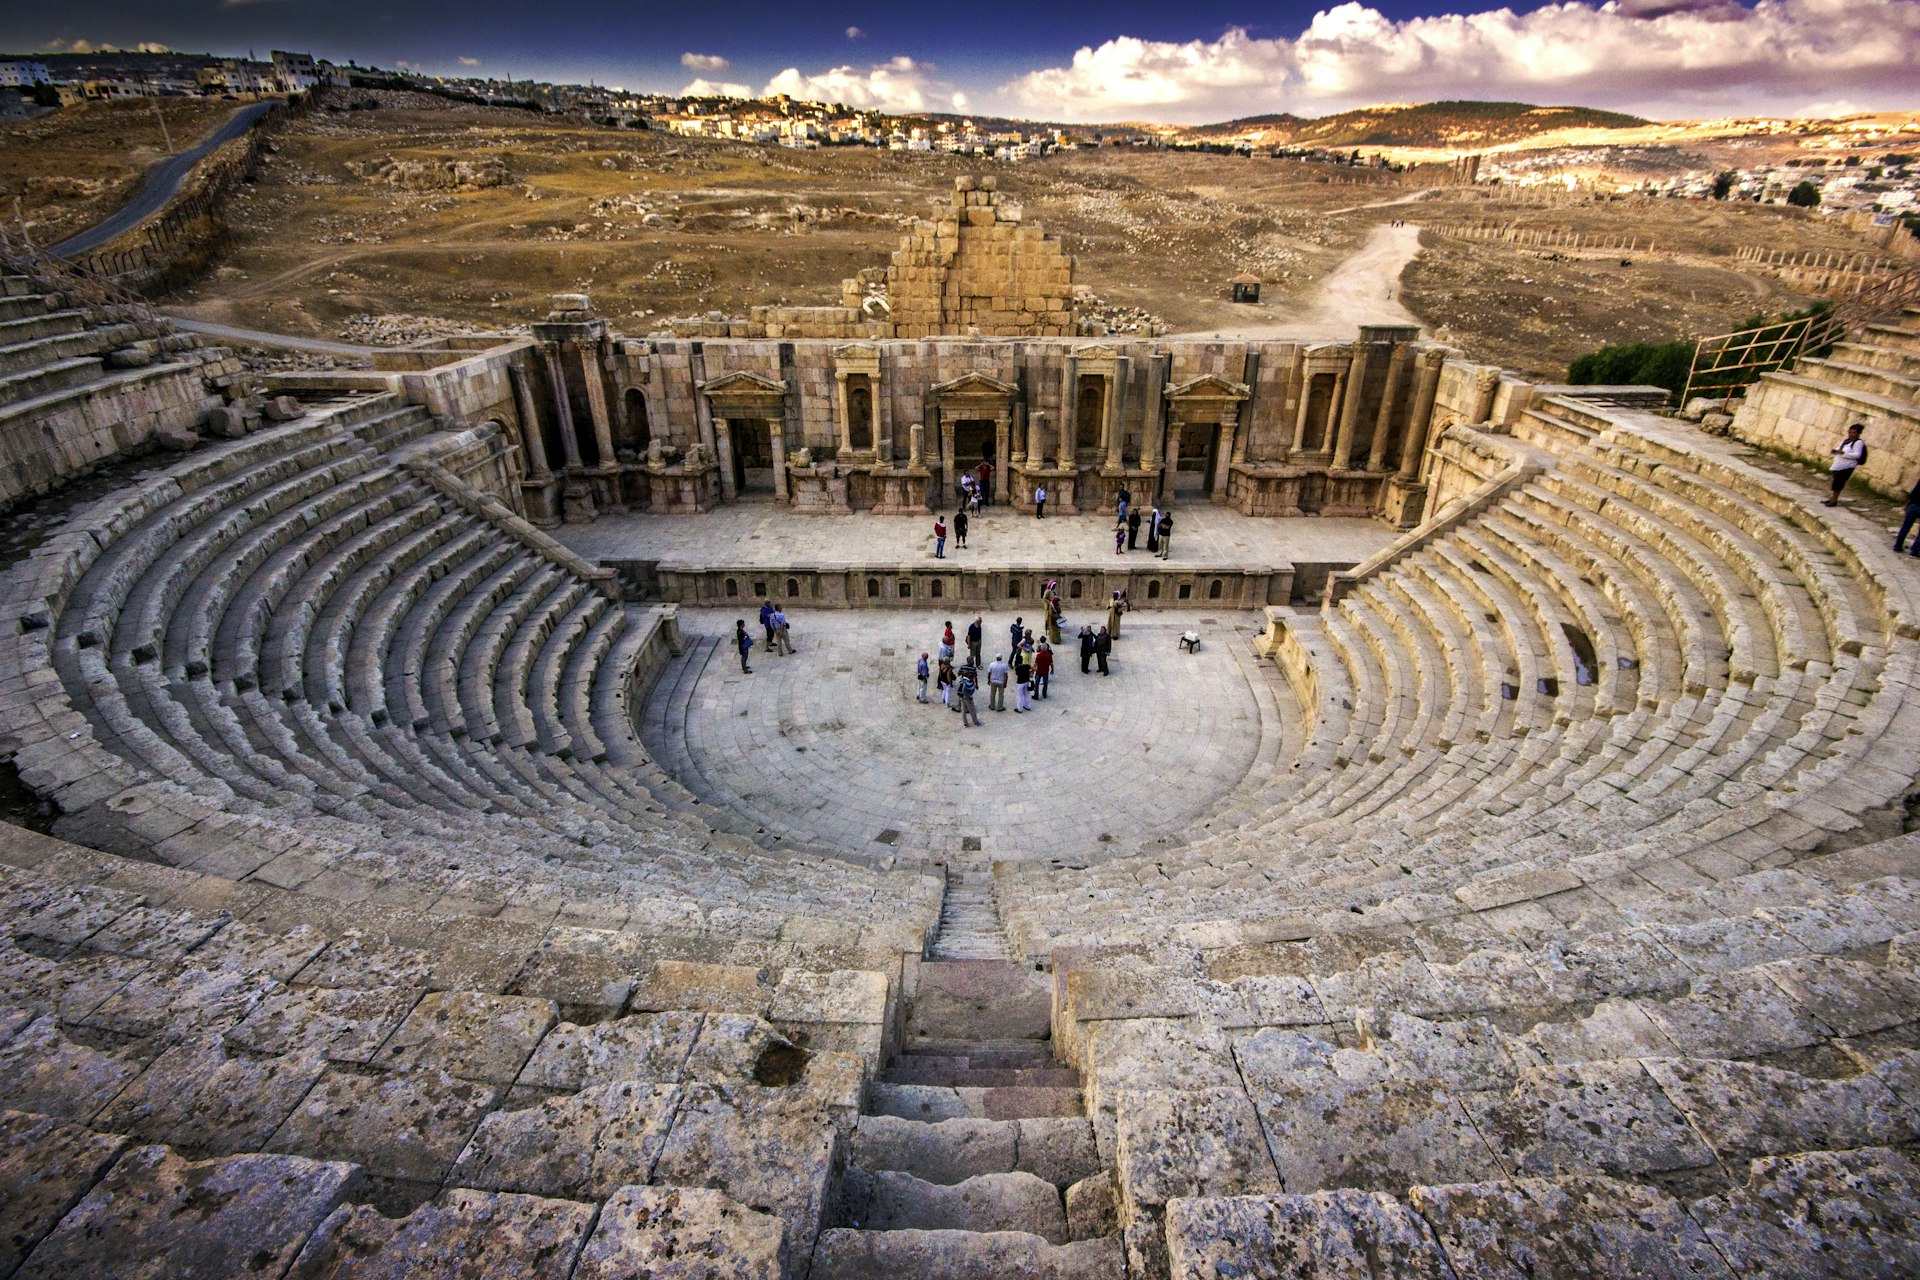 Visitors in the amphitheater, a major site among the ruins of the ancient Roman city of Jerash, Jordan